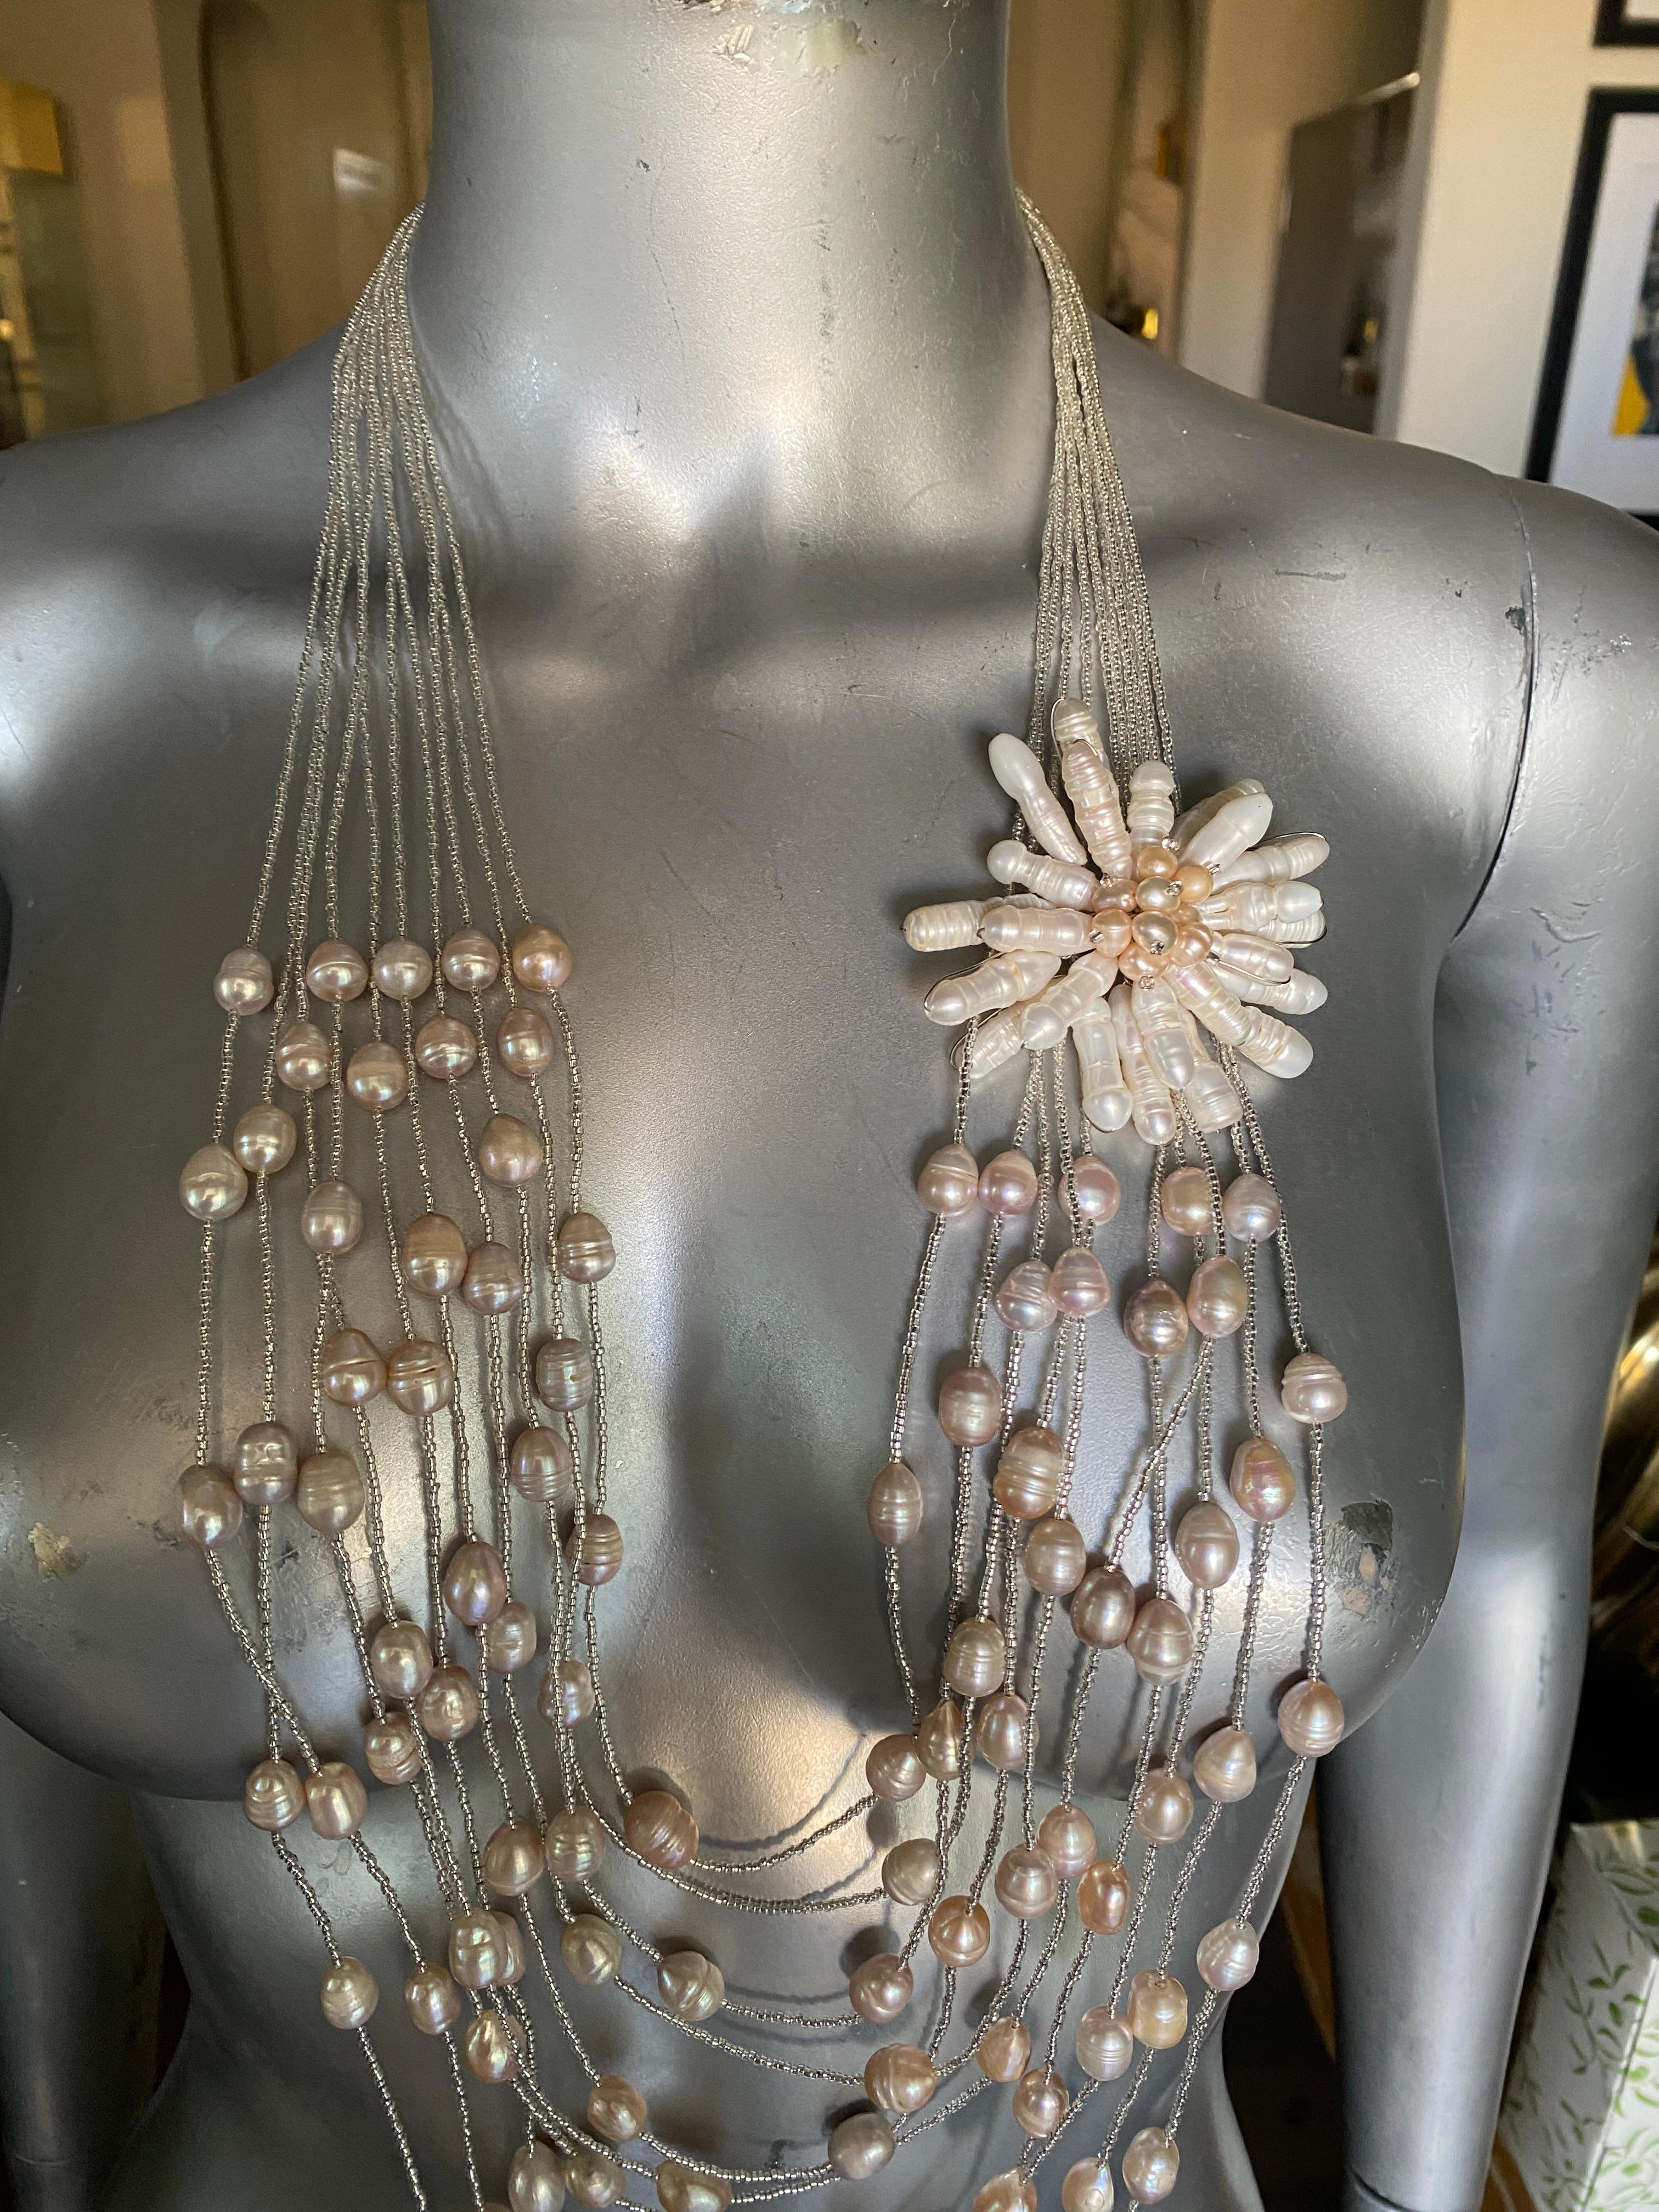 One of the most commented about necklaces we have posted on Instagram. A sold out piece by Italian Company Ottaviani Bijoux. A 10 strand neclace of silver mini beads draped with pearls and mother of pearl beads with signed silver clasp. The accent